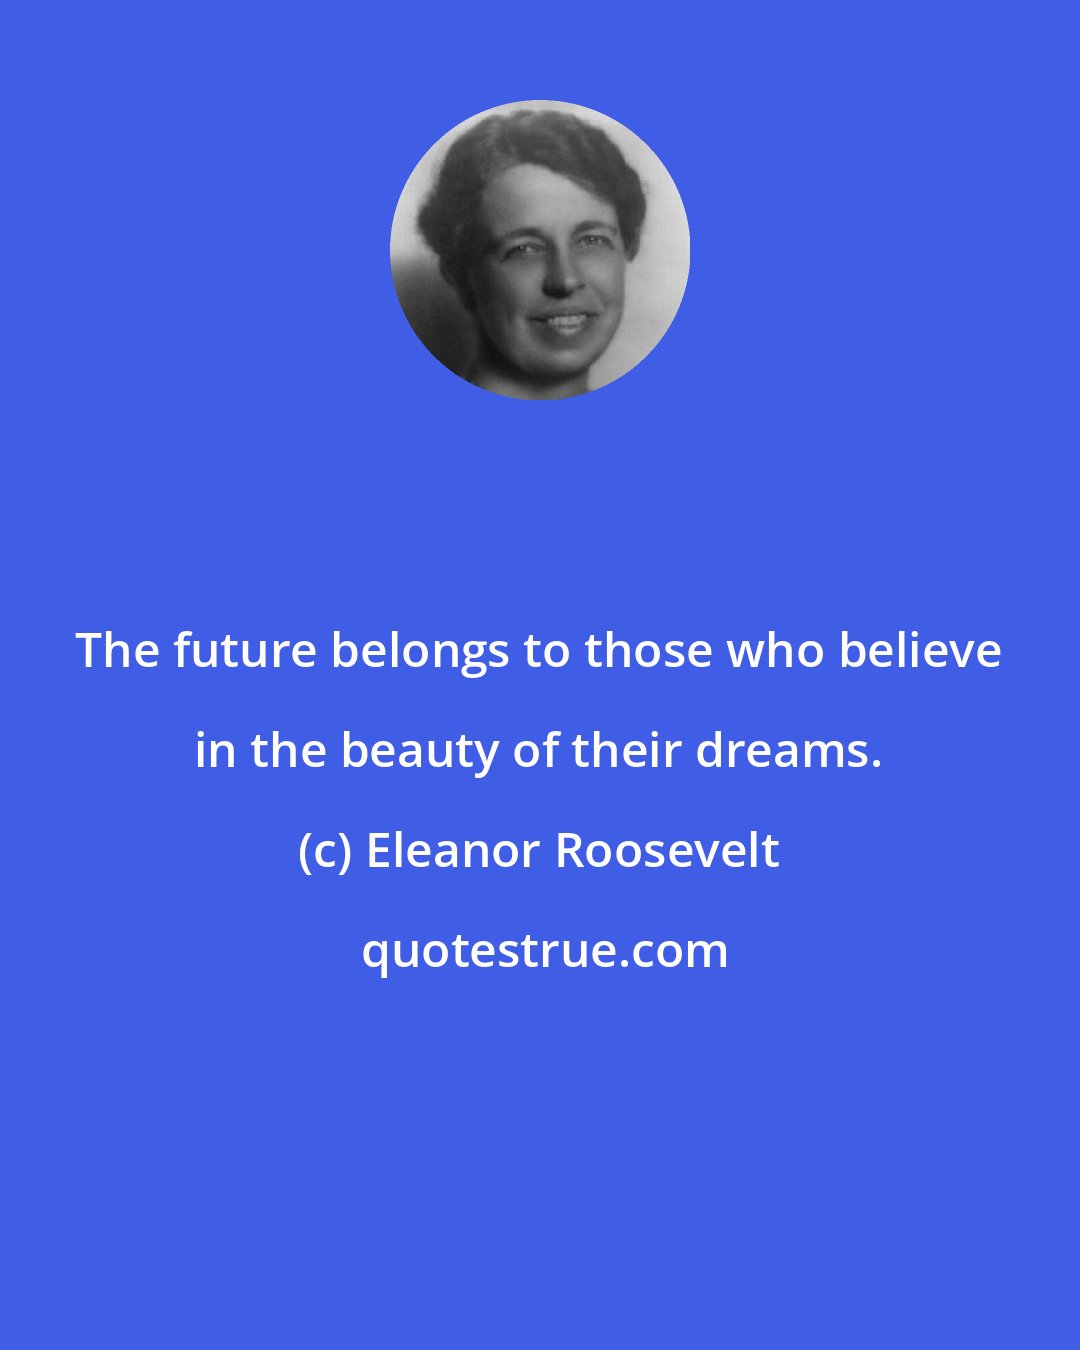 Eleanor Roosevelt: The future belongs to those who believe in the beauty of their dreams.